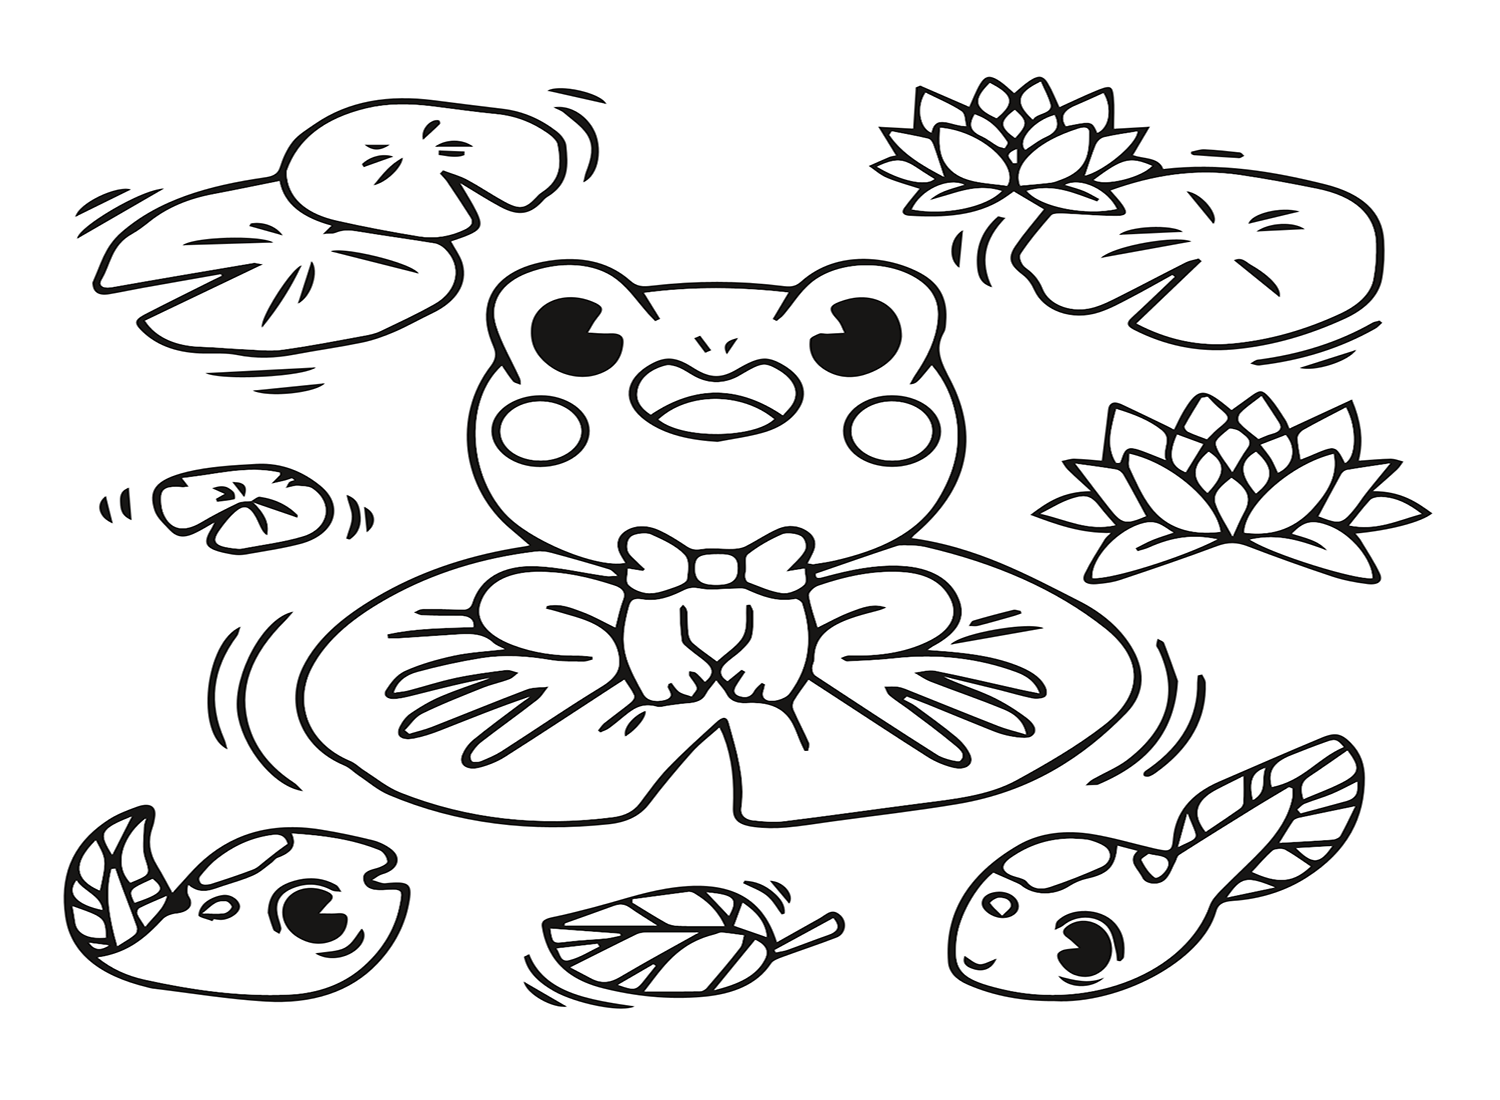 Kawaii Animal Stickers Coloring Pages